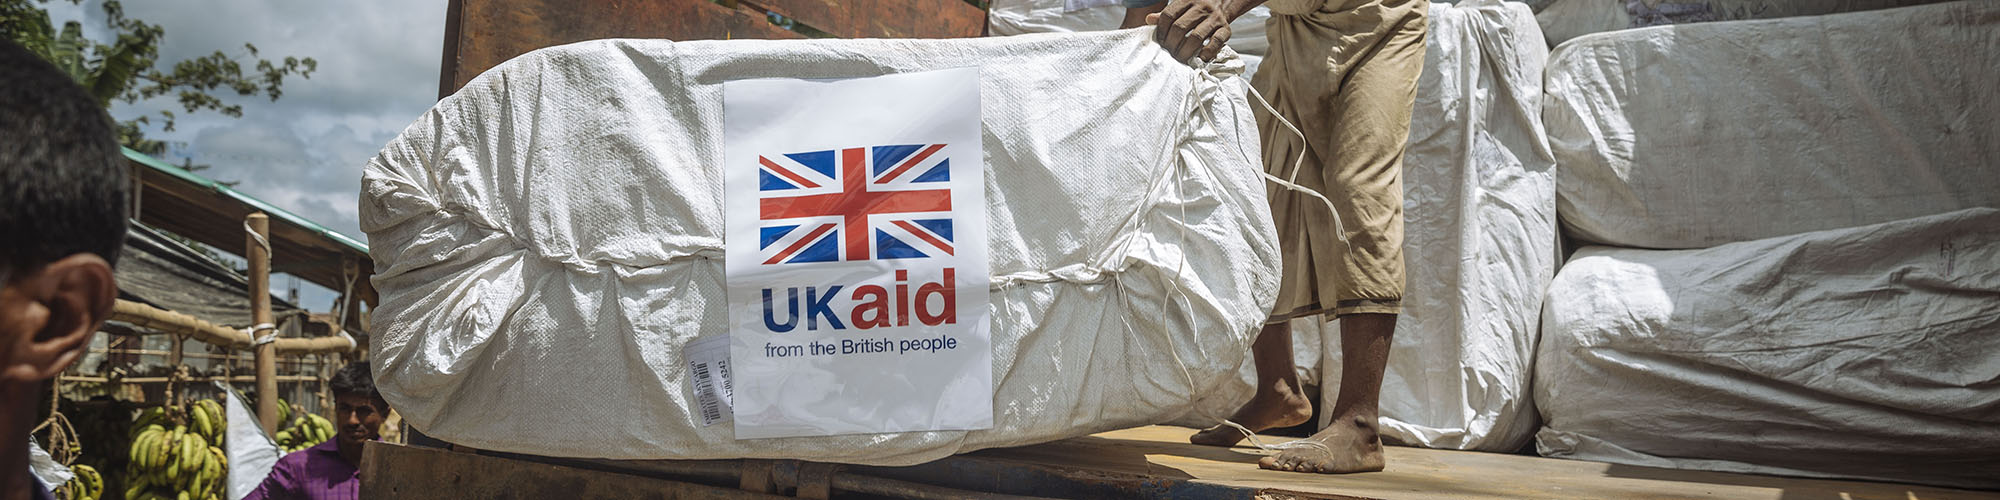 Ryan Henson: Smarter British aid can improve lives as well as project our values